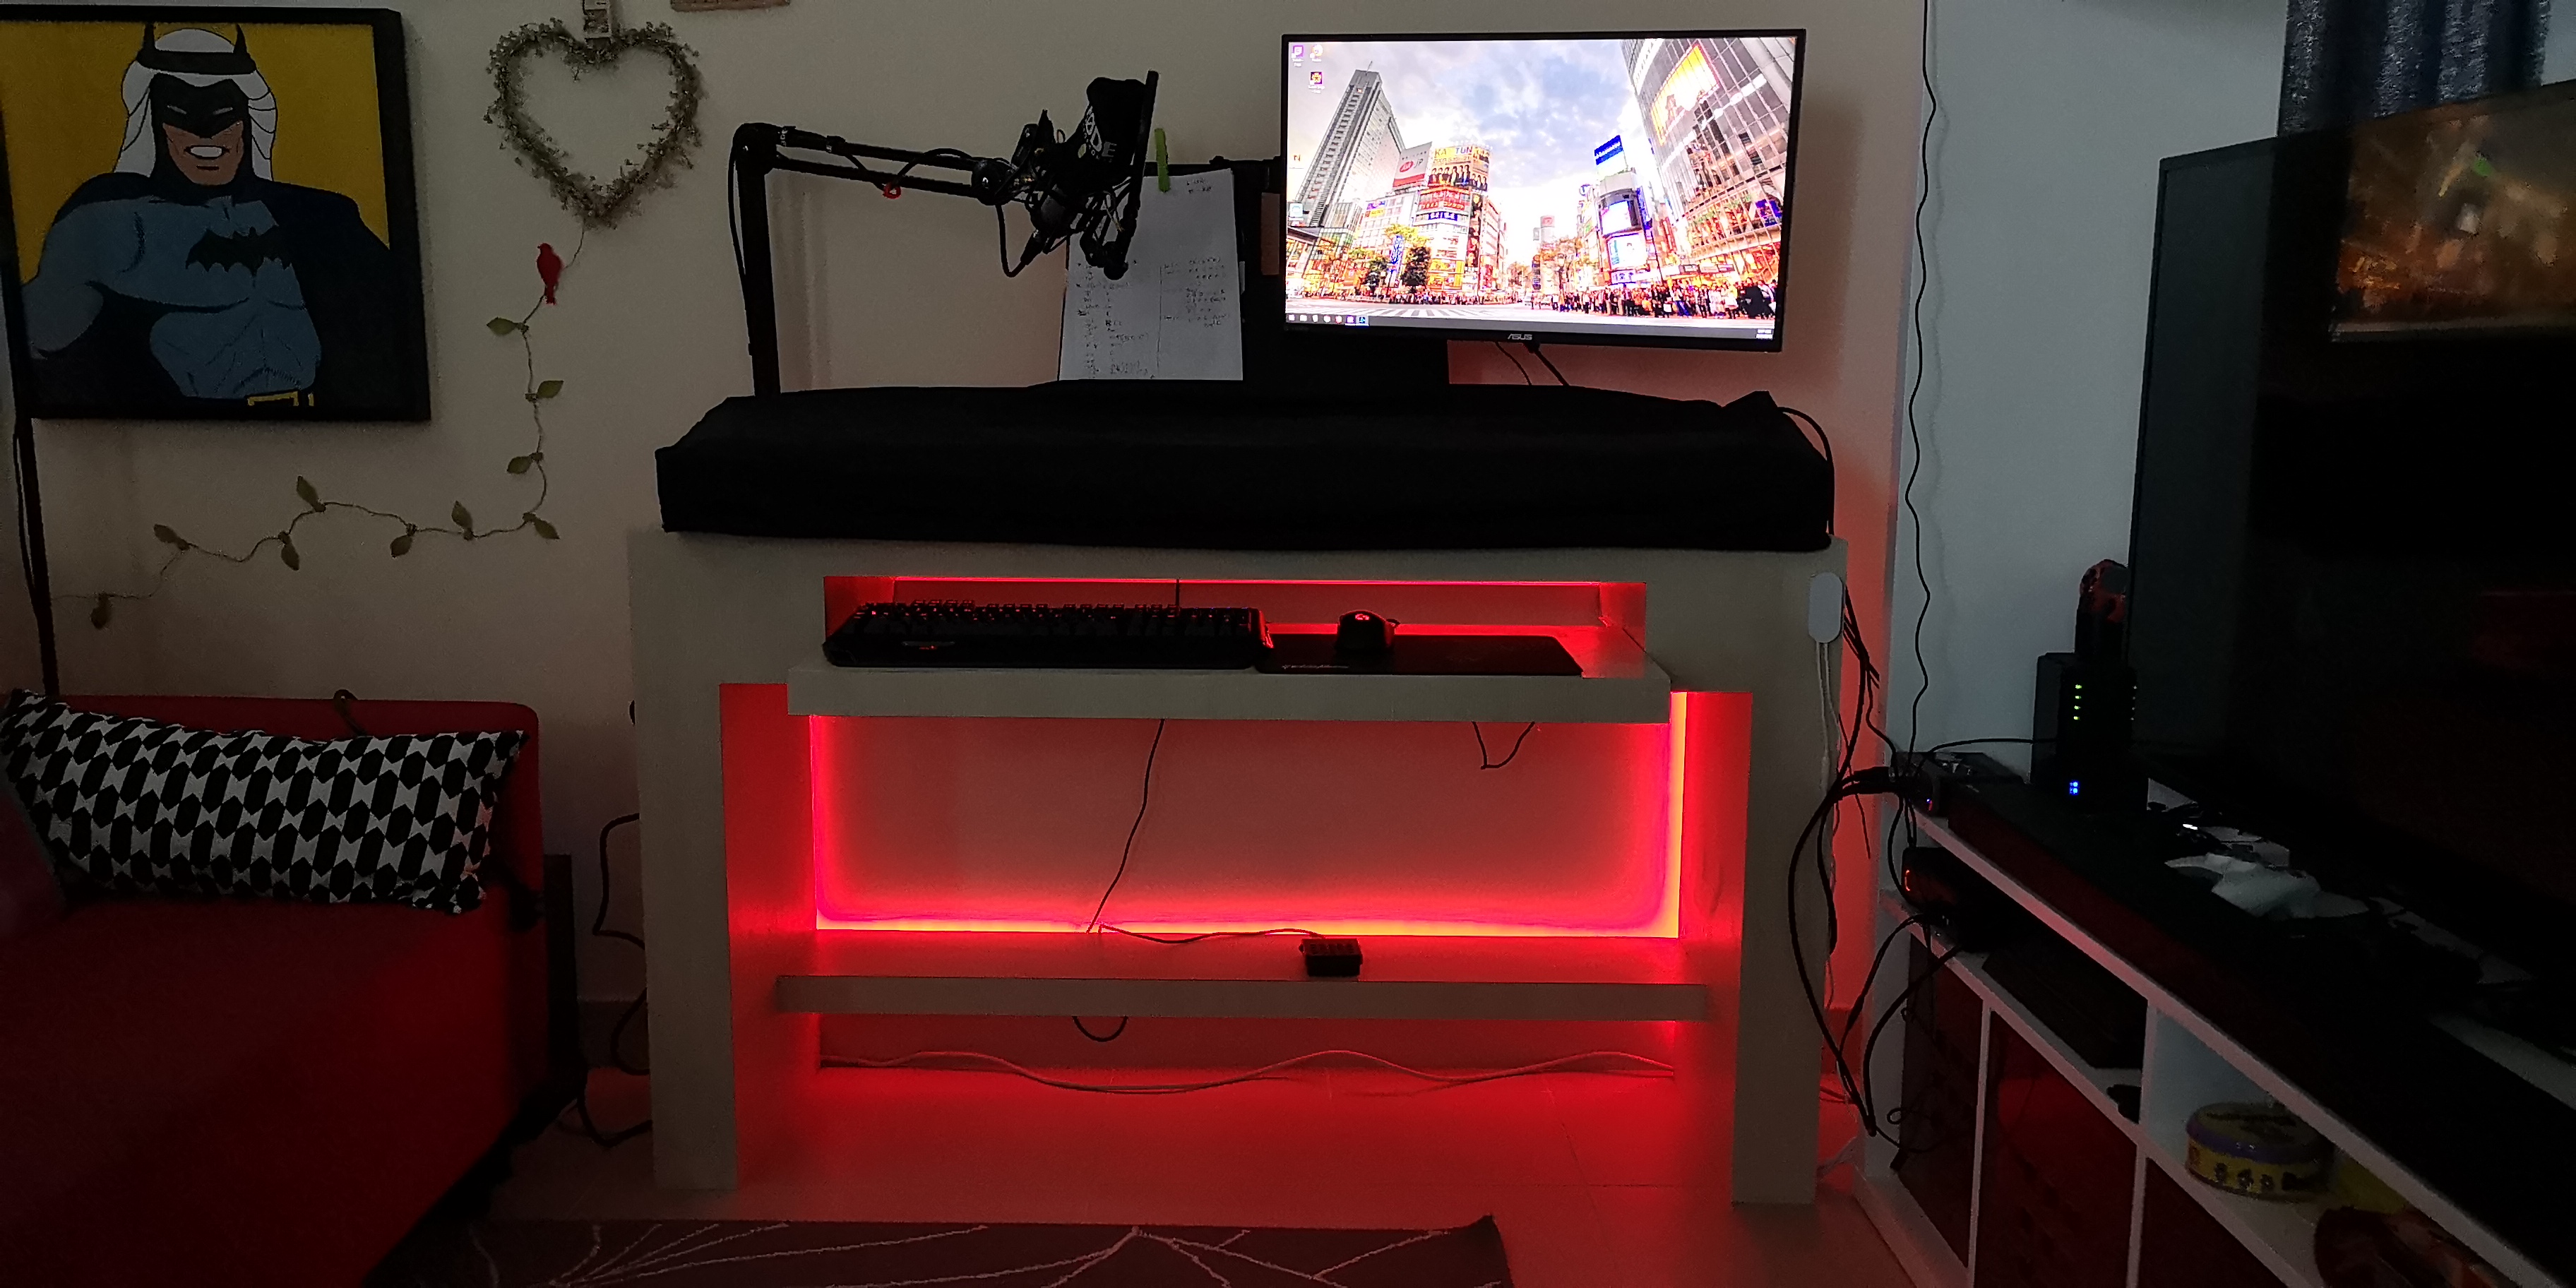 Govee LED Strip Lights with 7 Scenes and 3 Way Controls for sale online